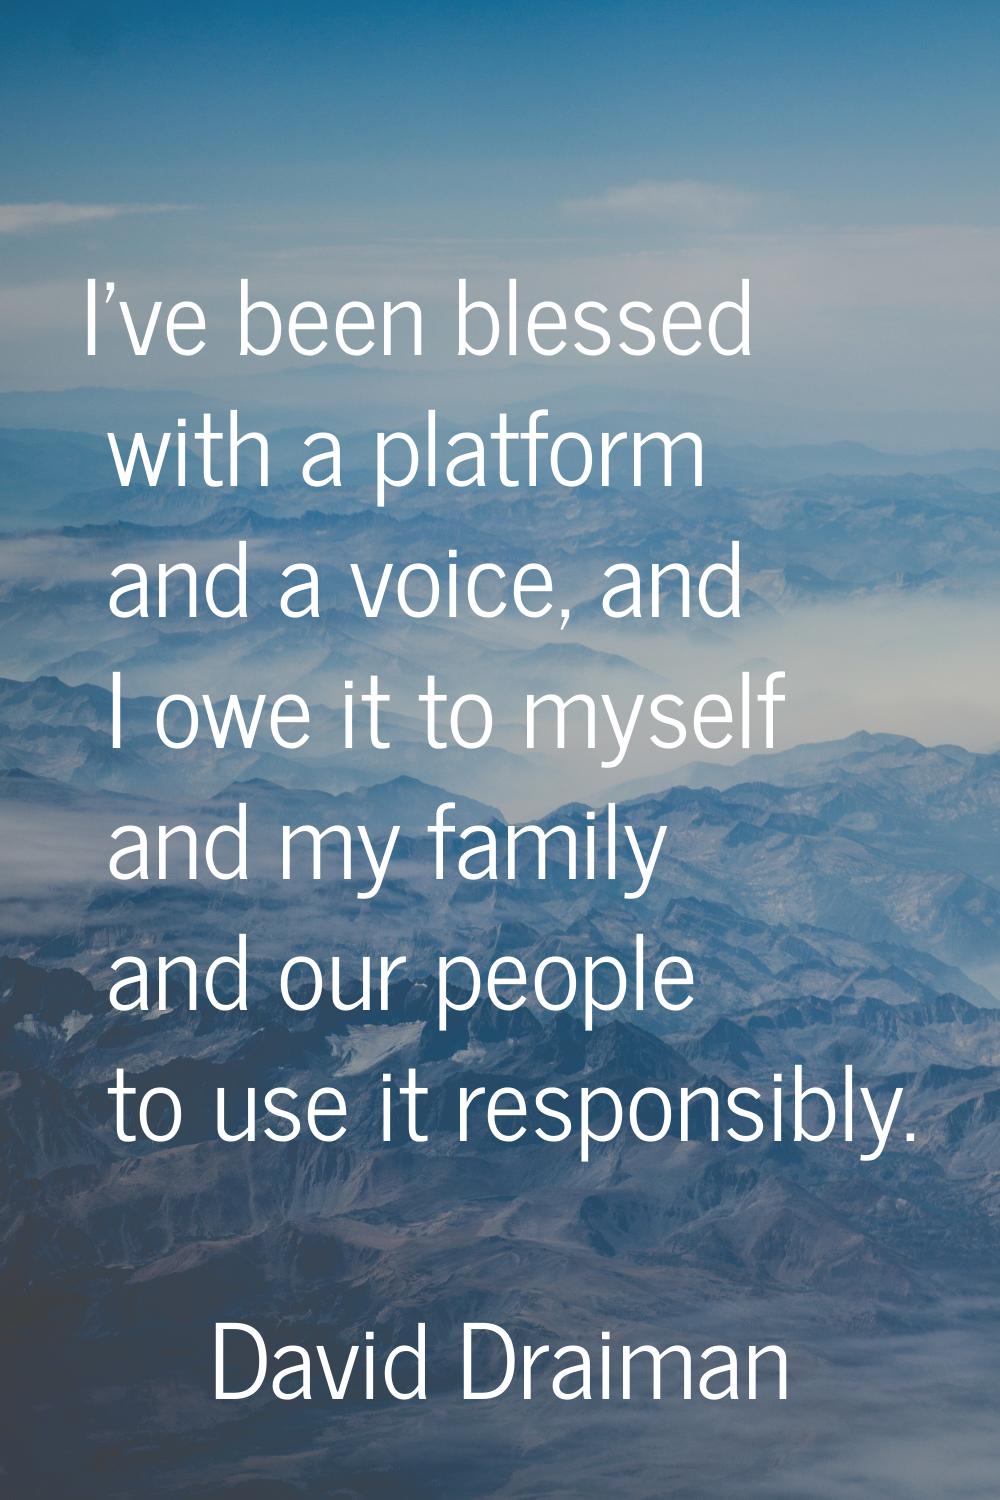 I've been blessed with a platform and a voice, and I owe it to myself and my family and our people 